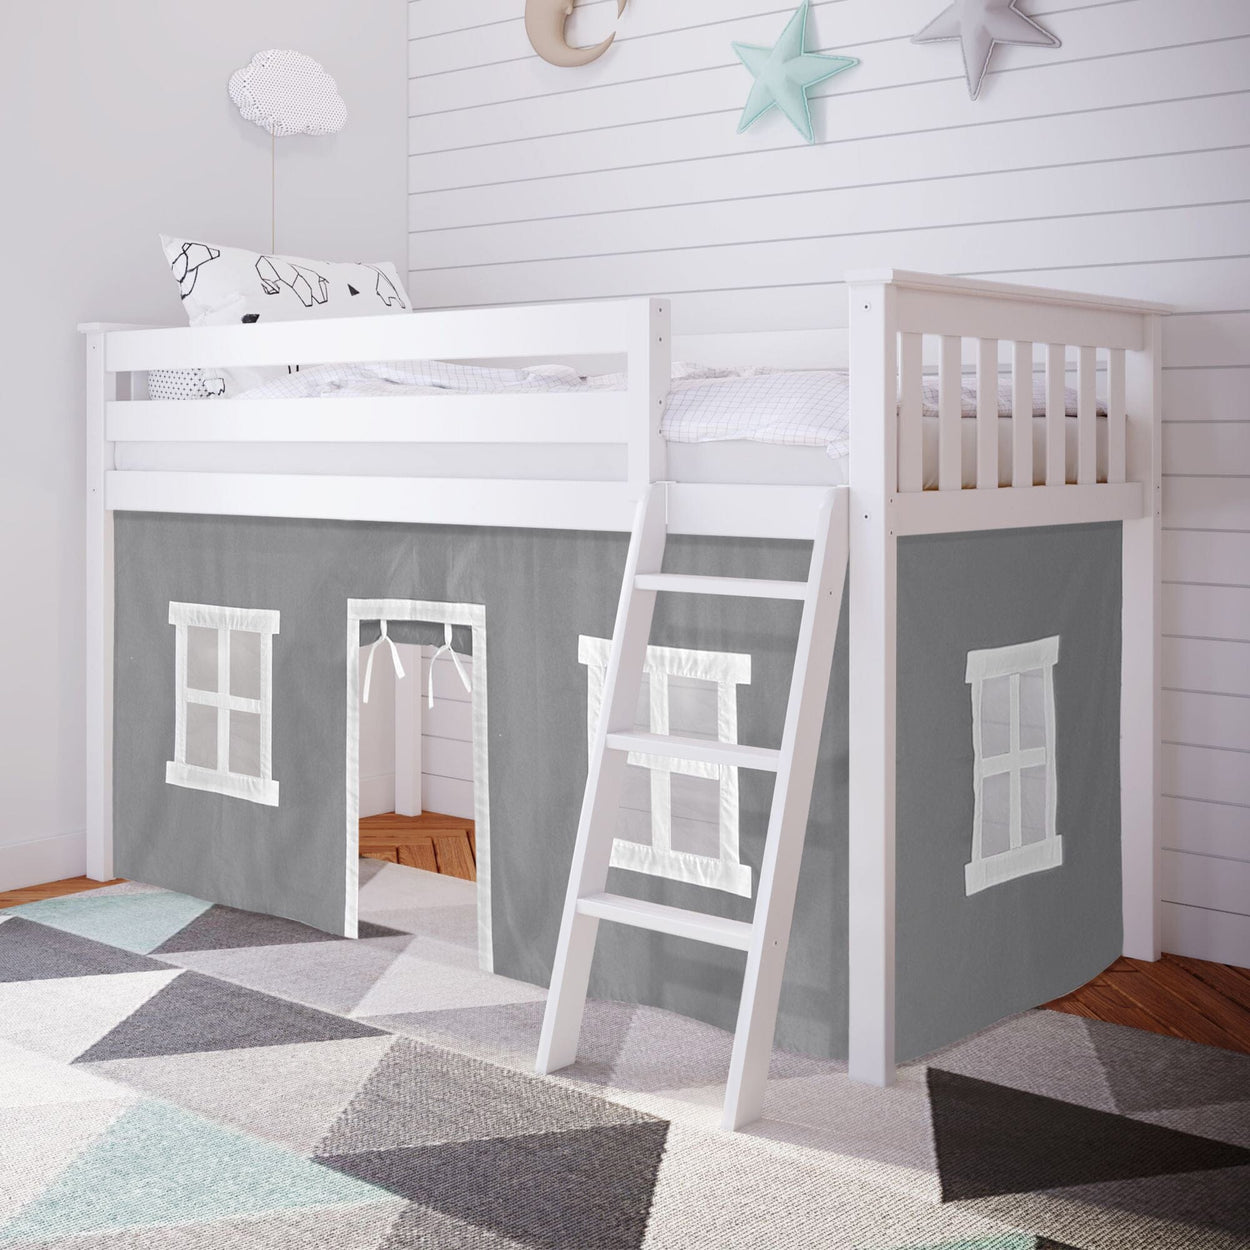 180212002054 : Loft Beds Twin-Size Low Loft With Curtain, White + Grey Curtain